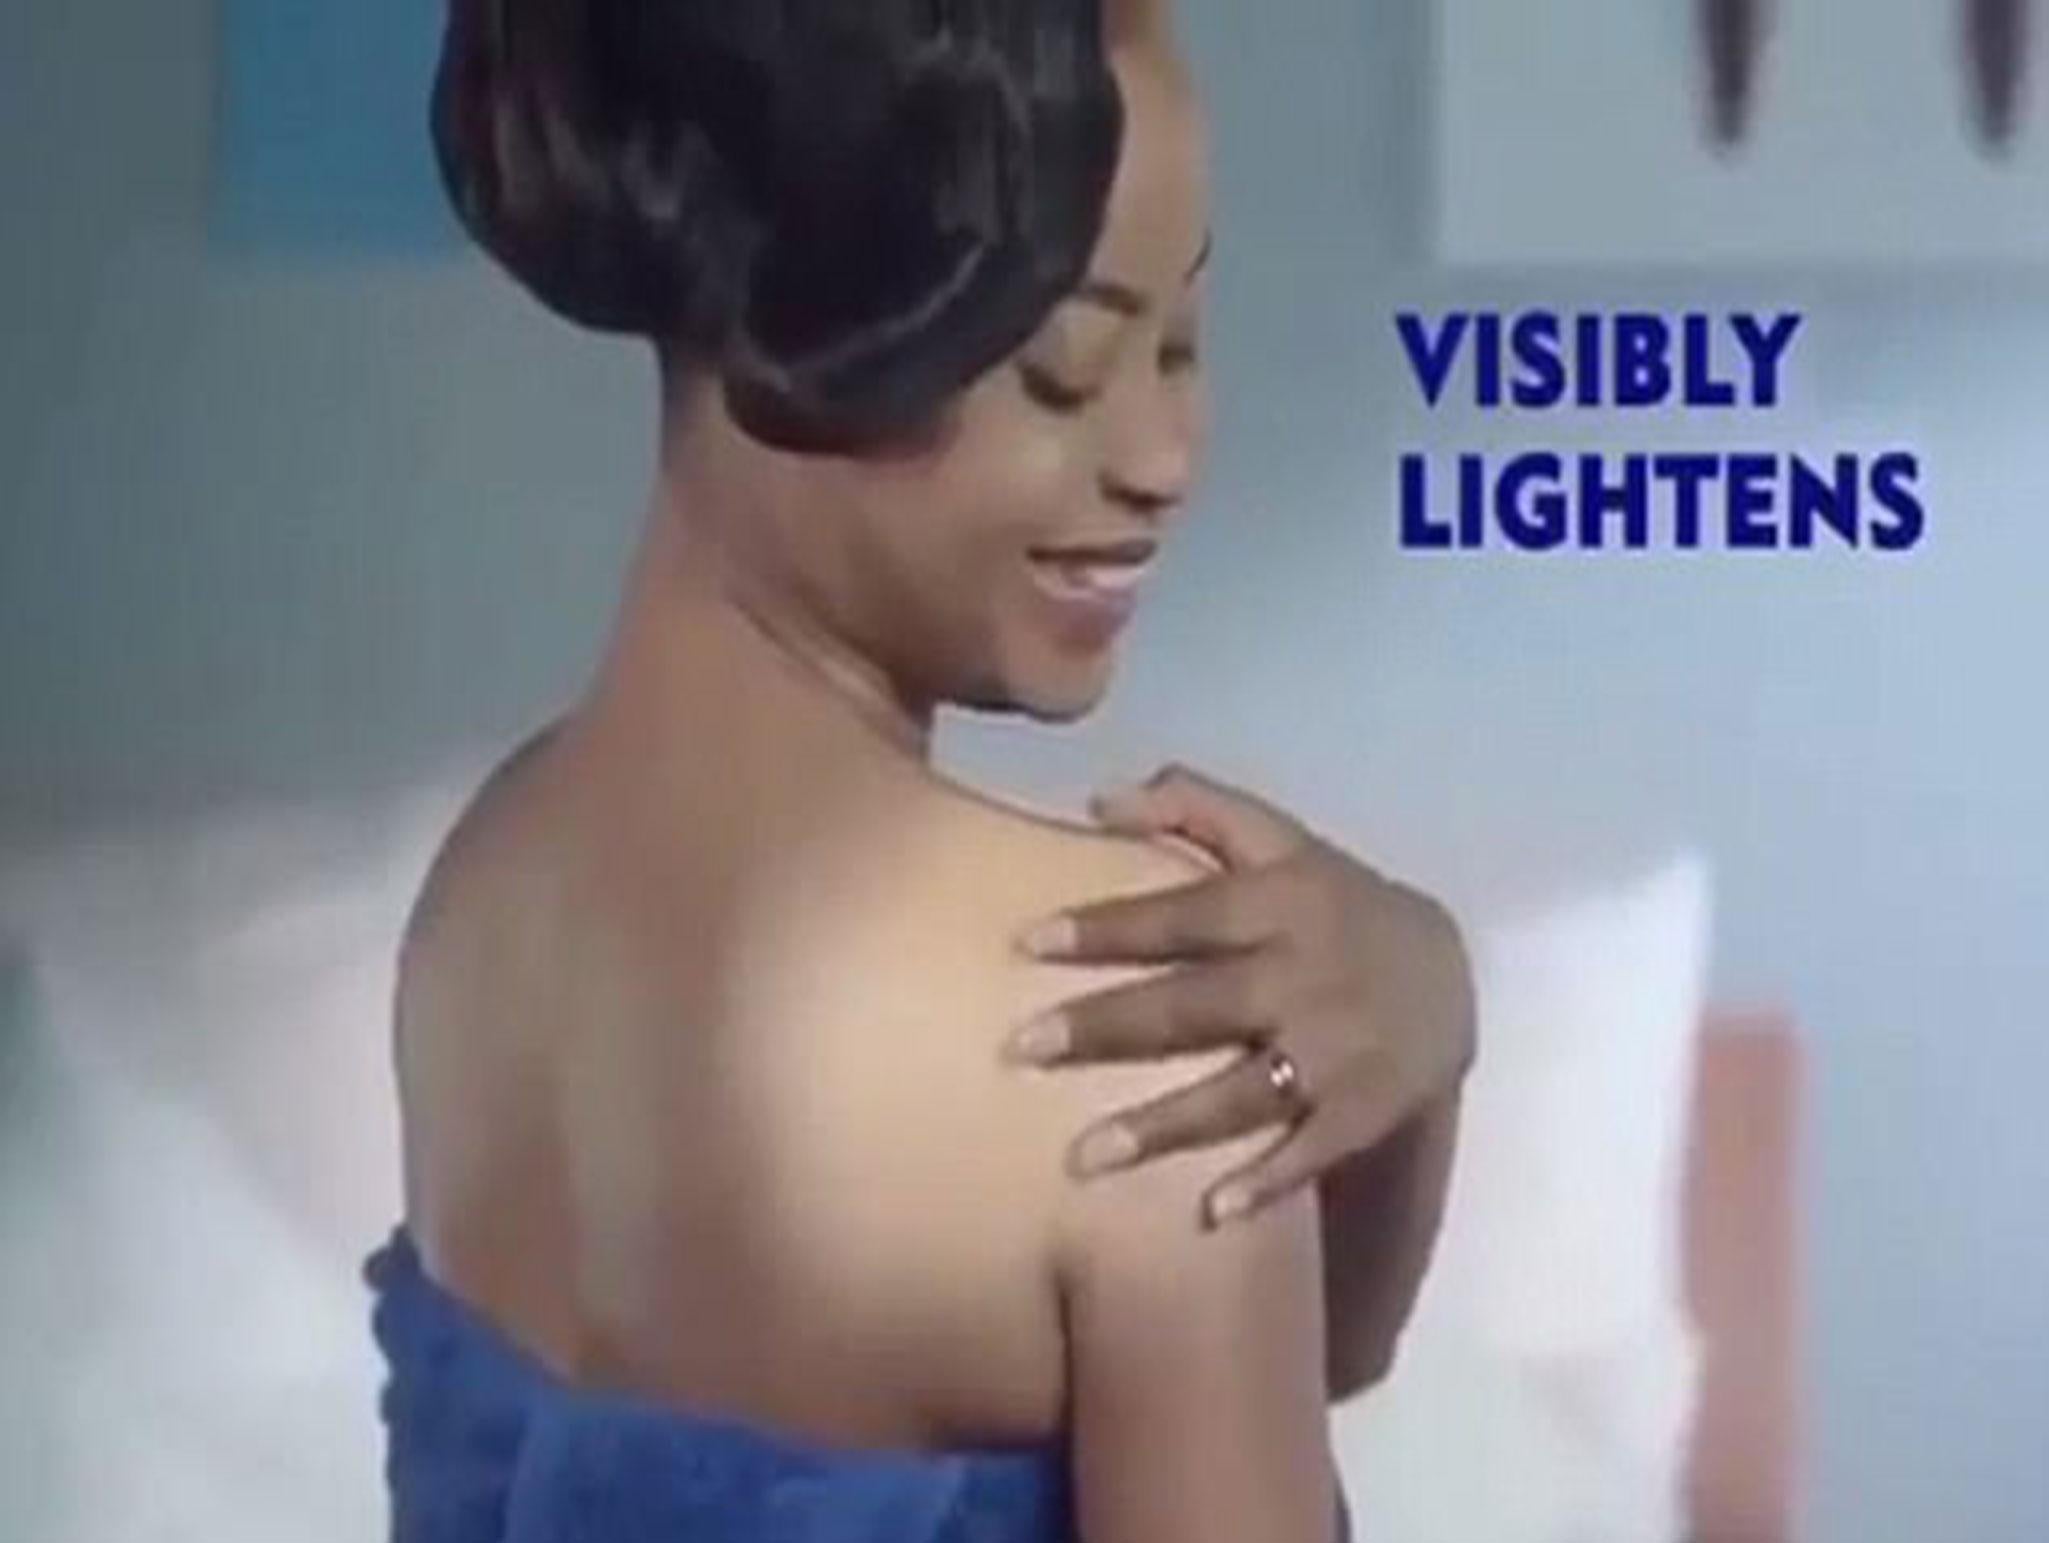 Some Twitter users have suggested that Nivea is responding to consumer demand